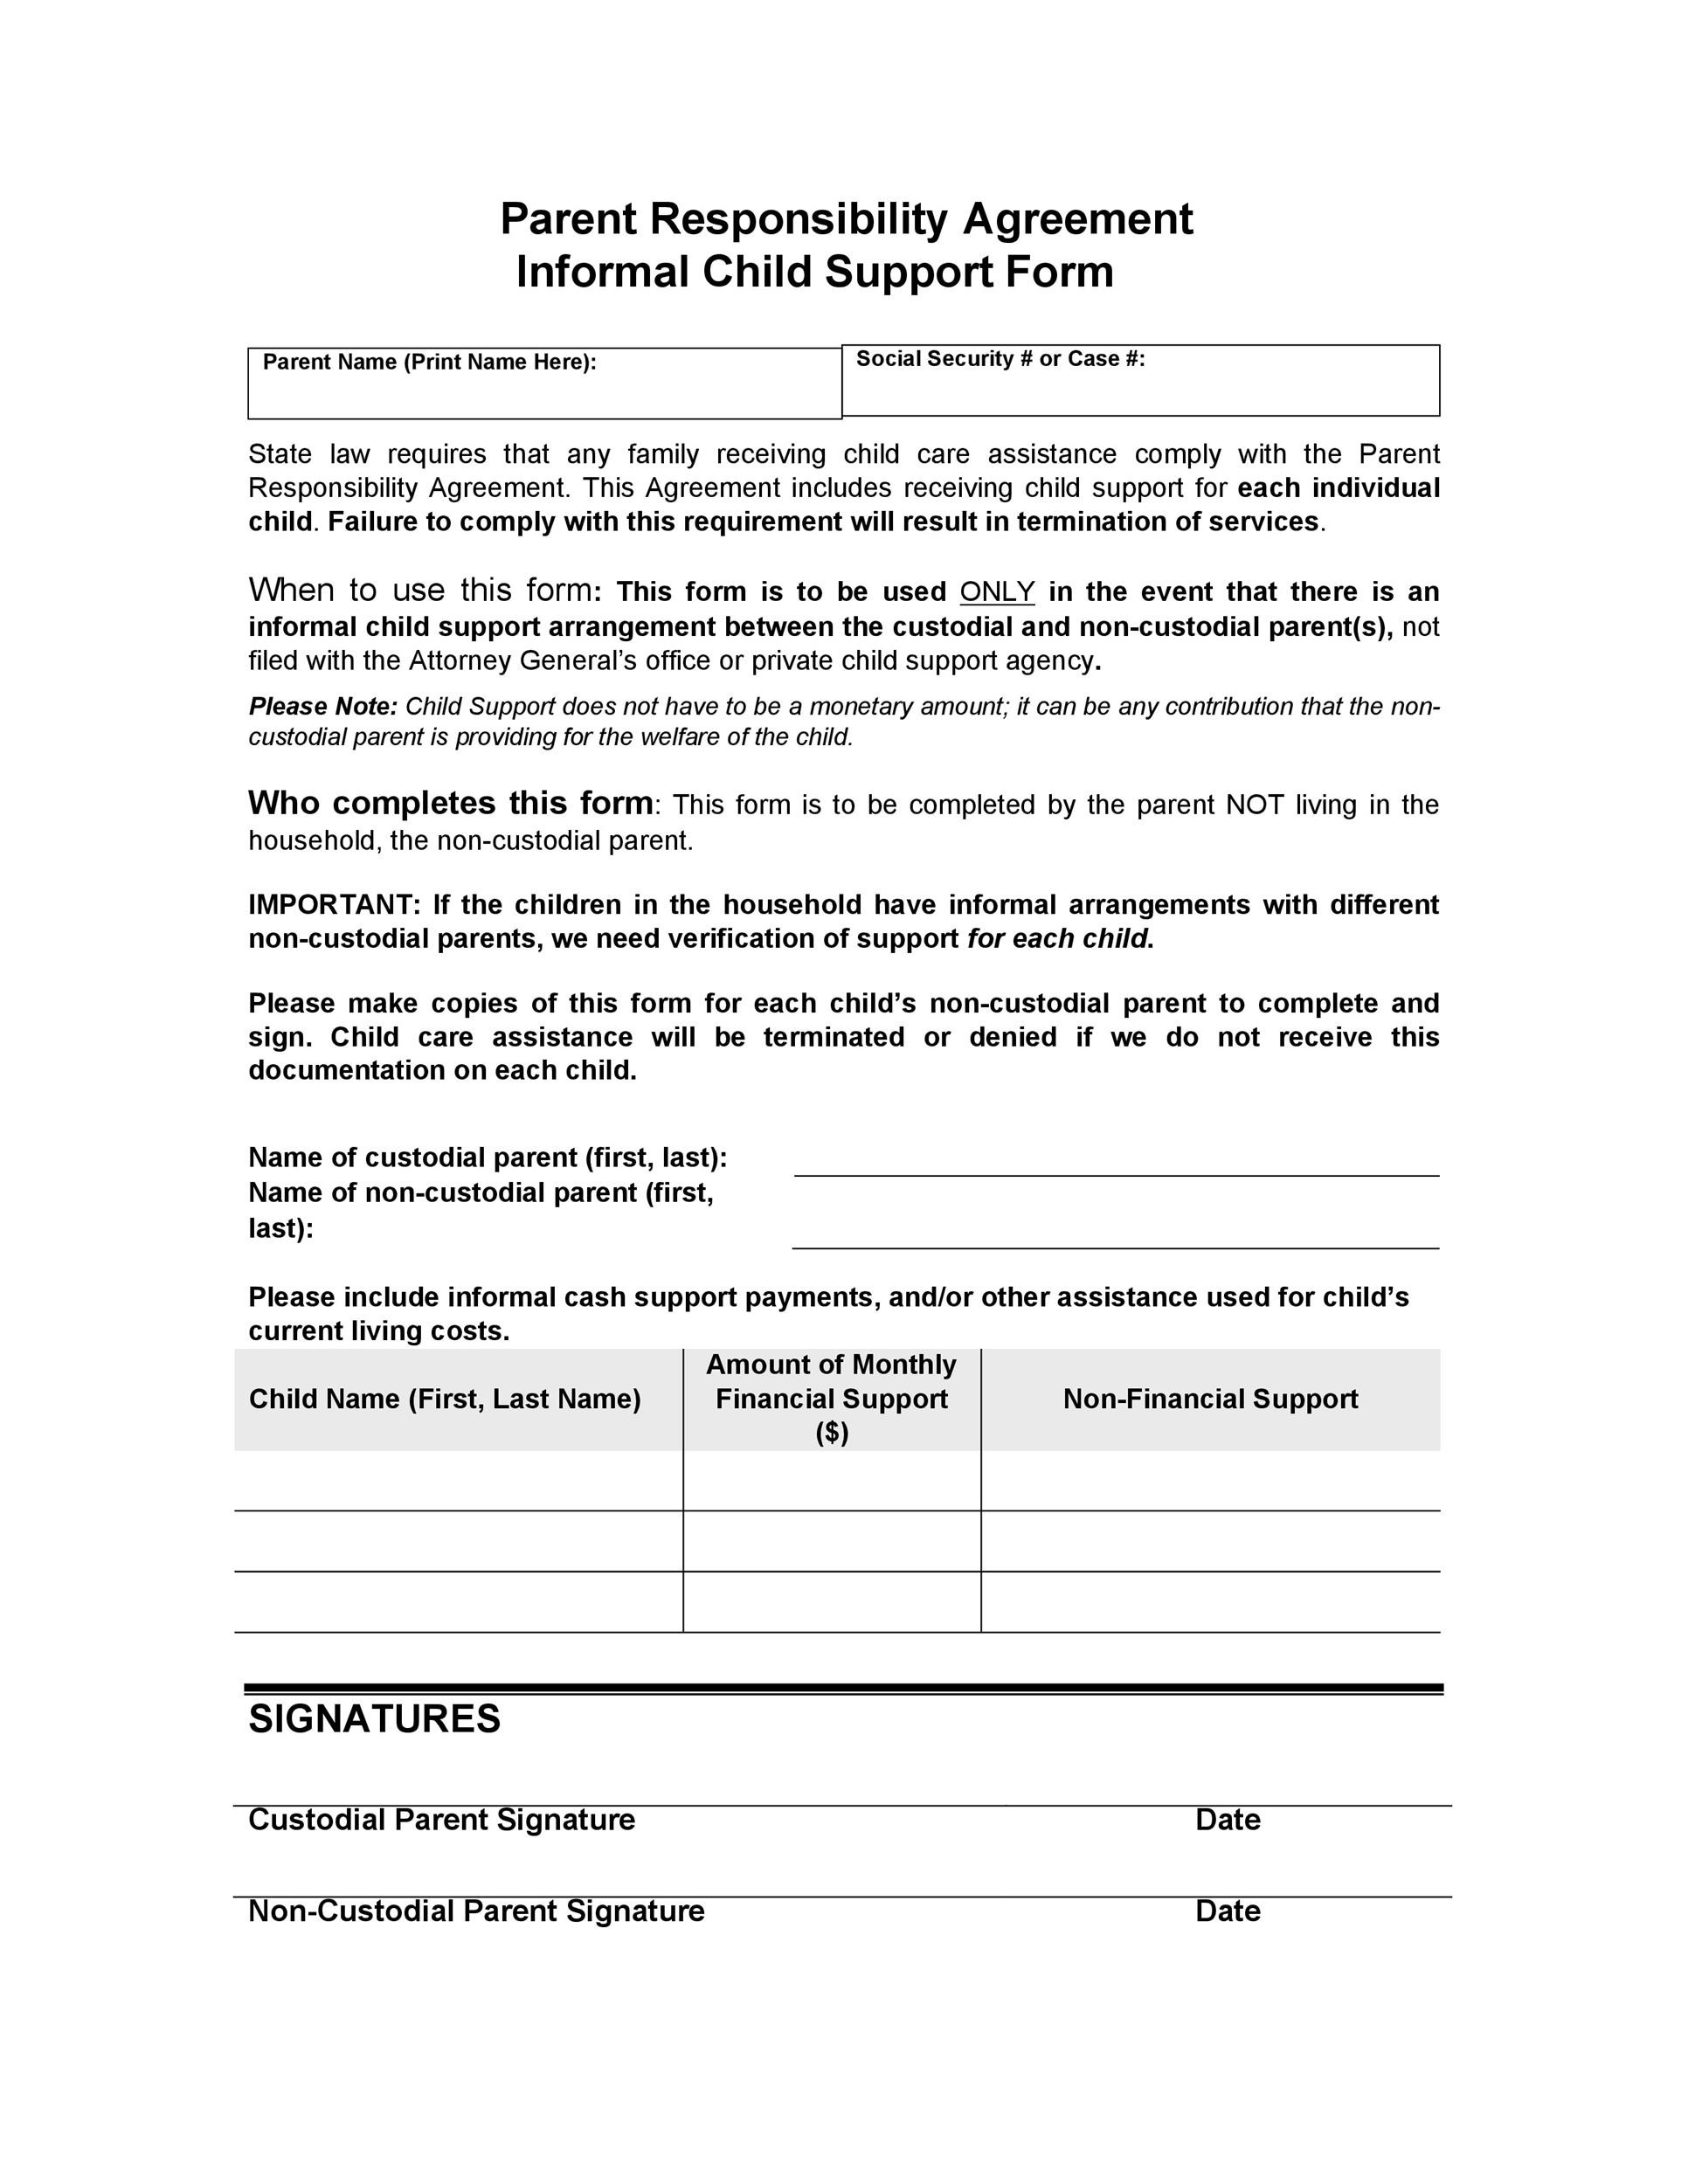 free-printable-child-support-agreement-forms-printable-forms-free-online